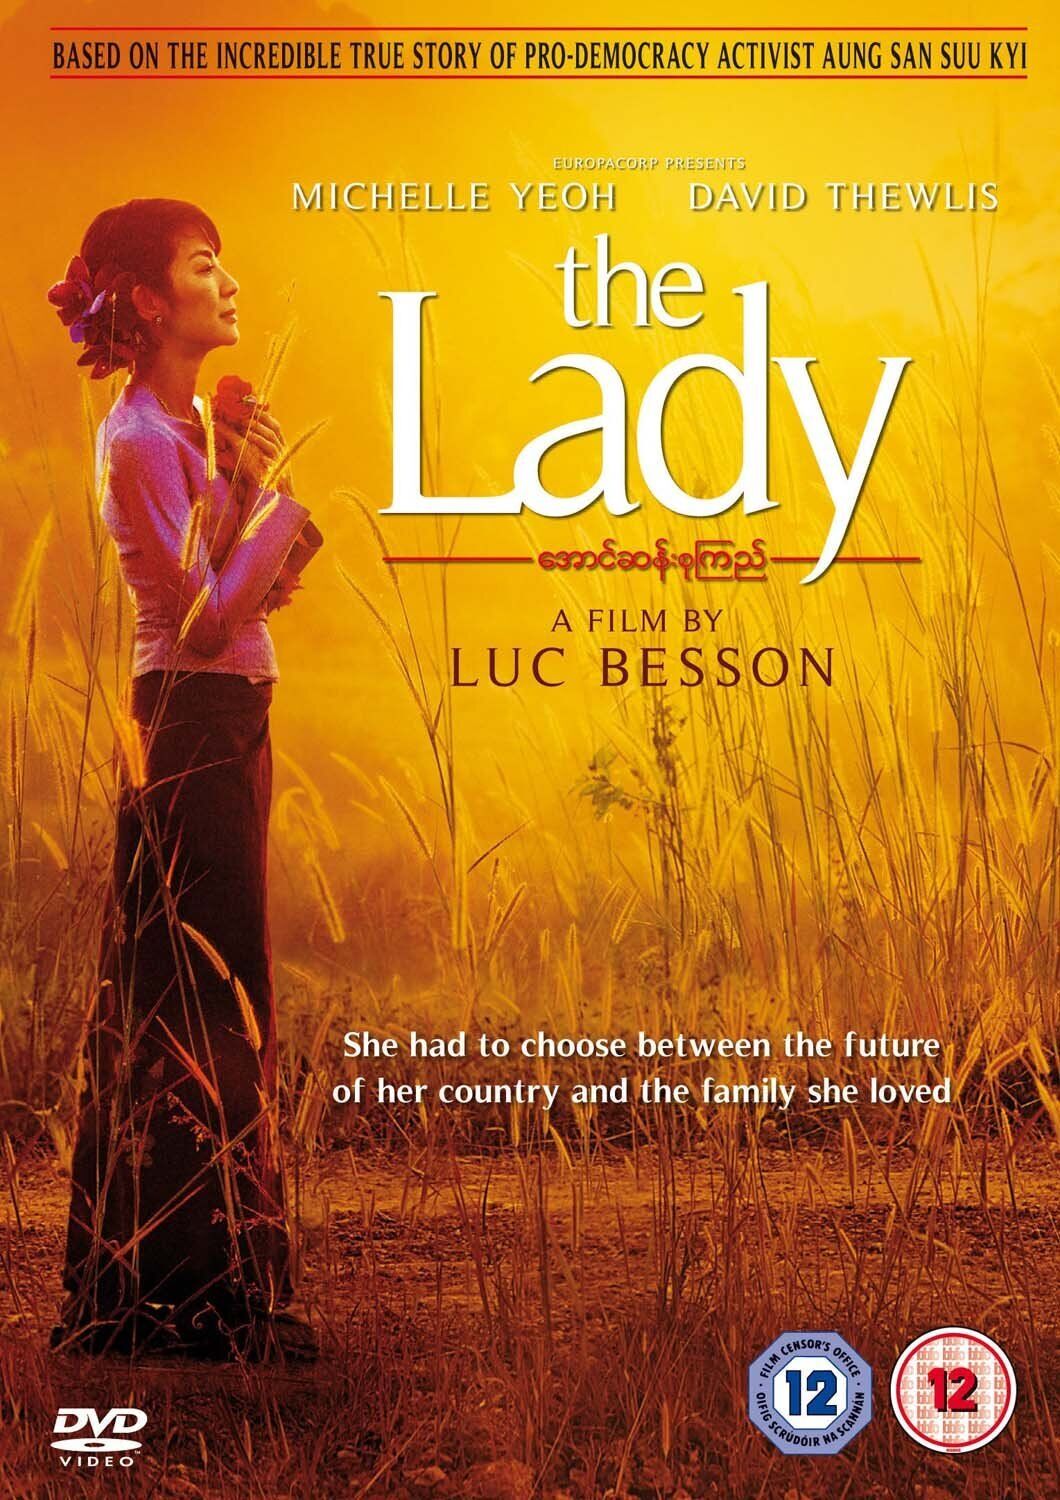 cover of Movie DVD Lady in a field of wheat, at sunset